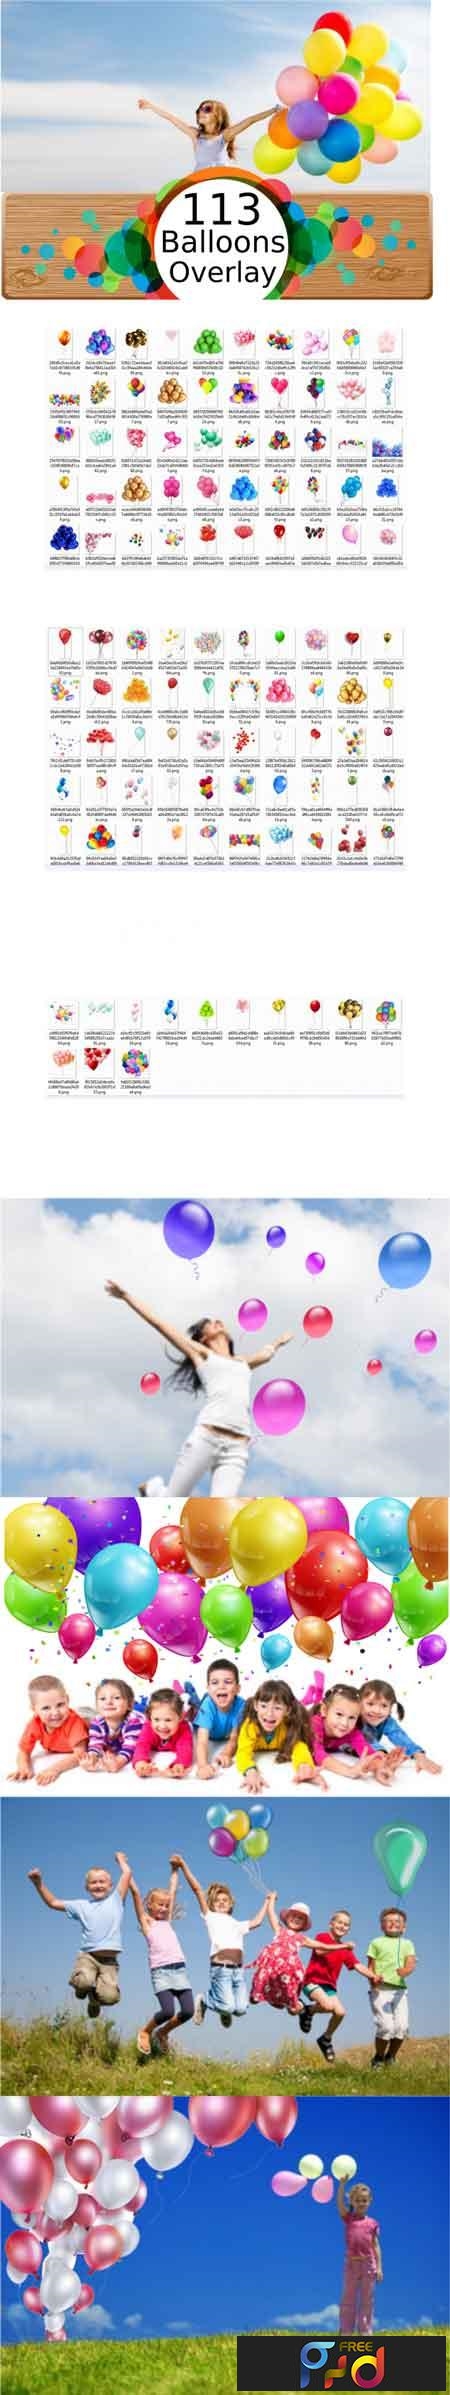 FreePsdVn.com 1814127 STOCK 113 balloons balloon photo overlays in png photography 3497714